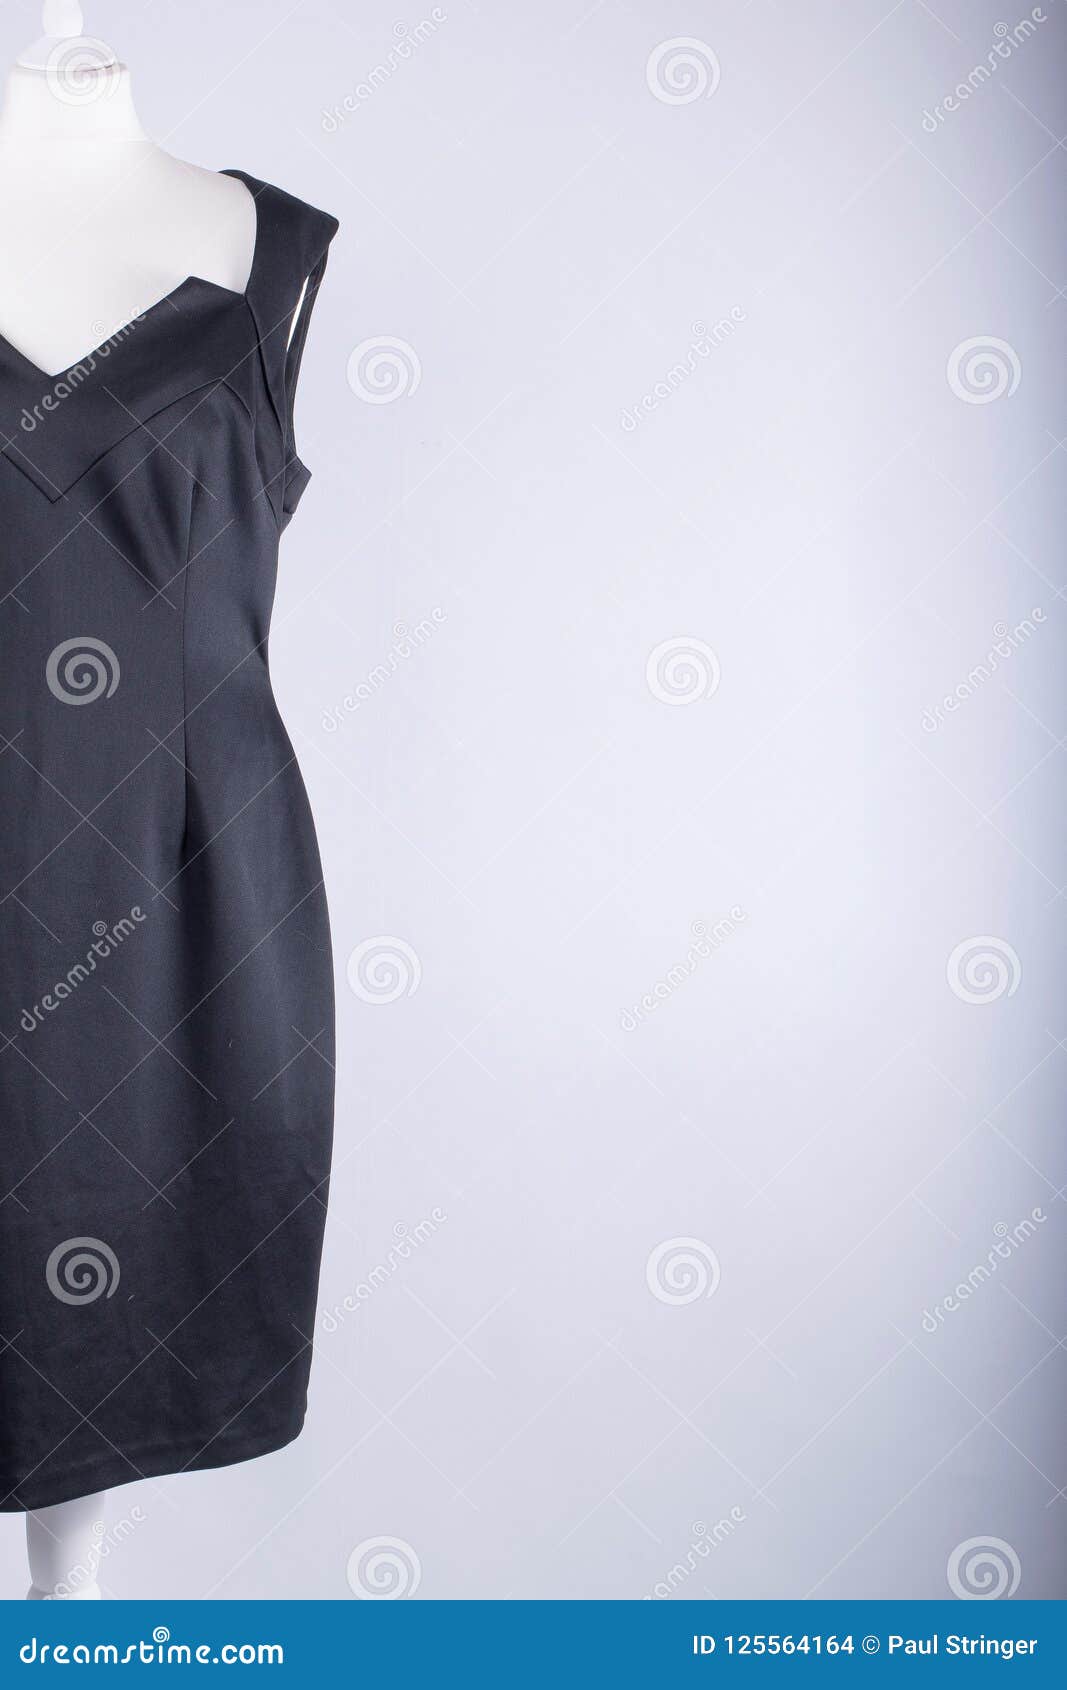 Tailors Mannequin Dressed in a Black Dress Stock Photo - Image of ...